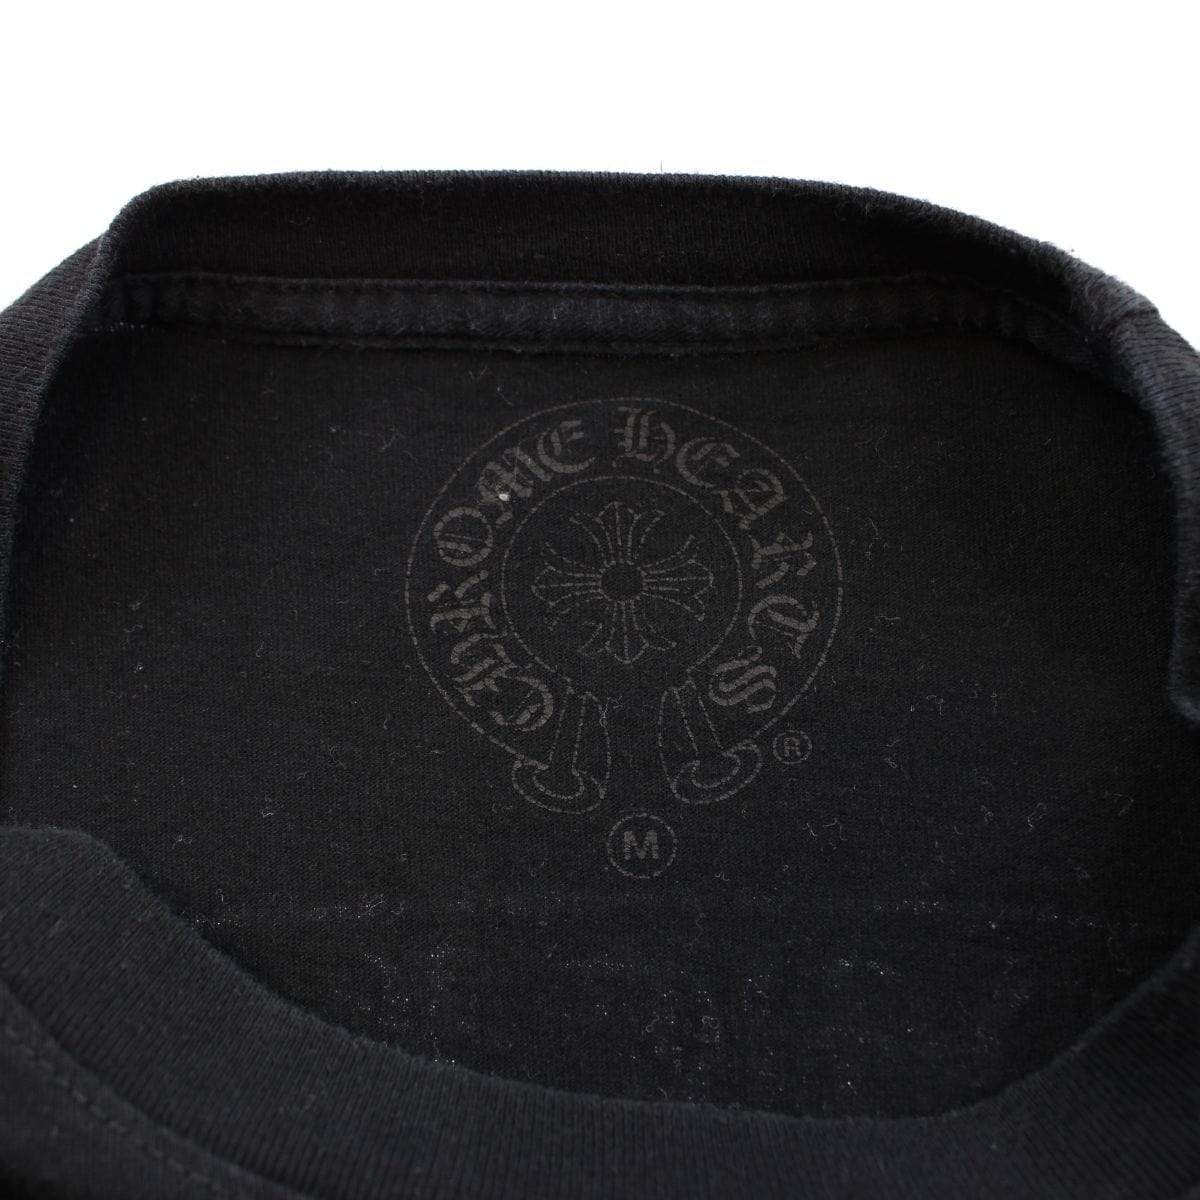 chrome hearts text ls black - SaruGeneral